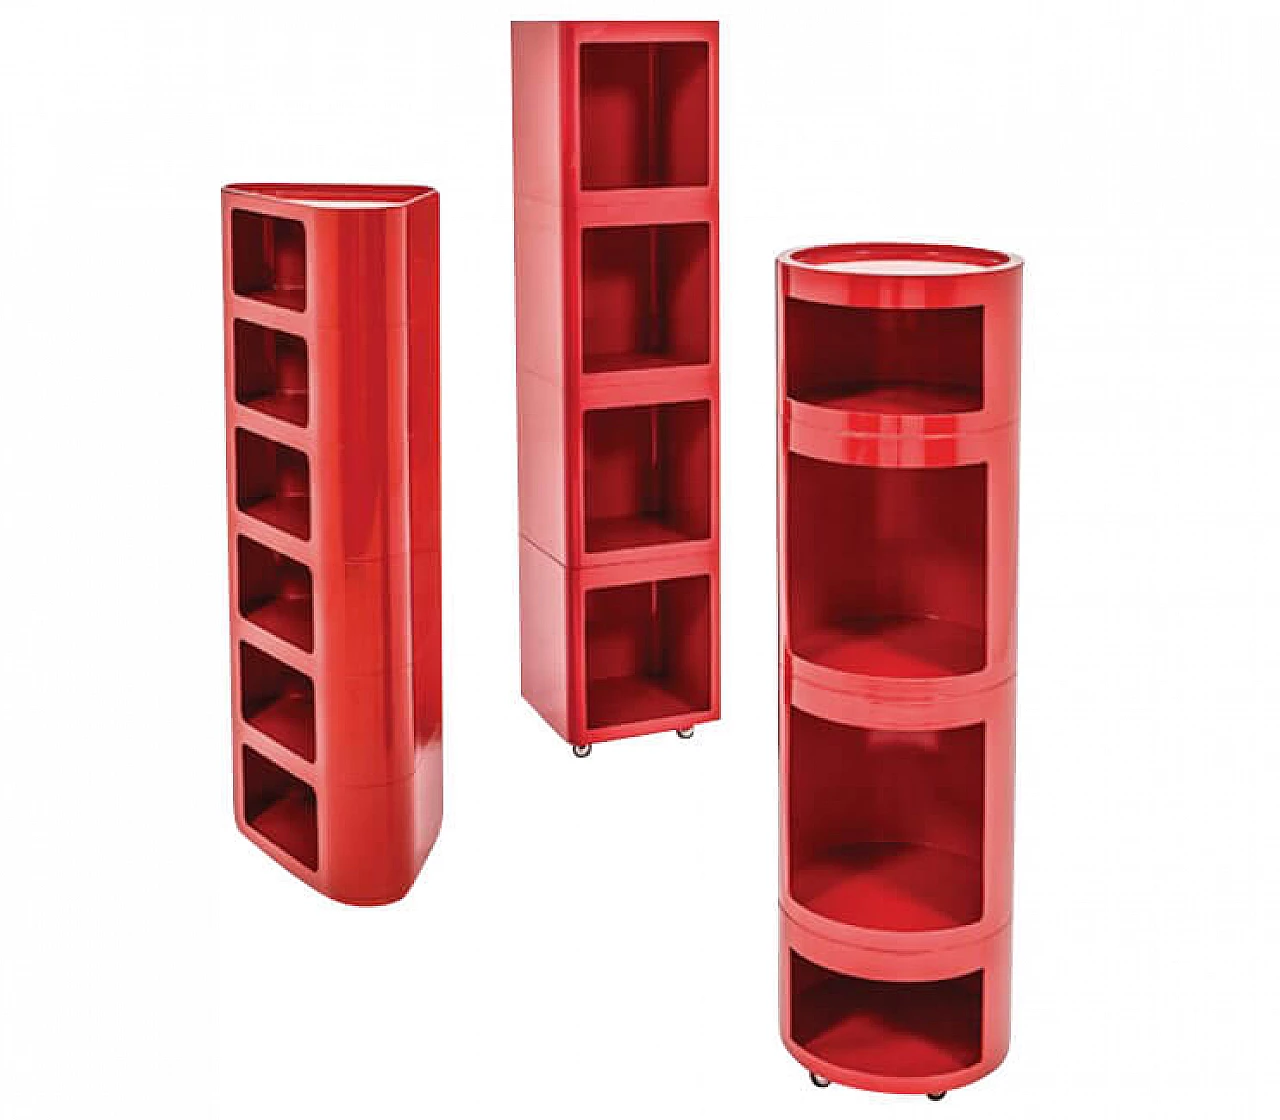 Valletto trinagular stackable shelves by G. Brusa for Valenti, 70s 1229643